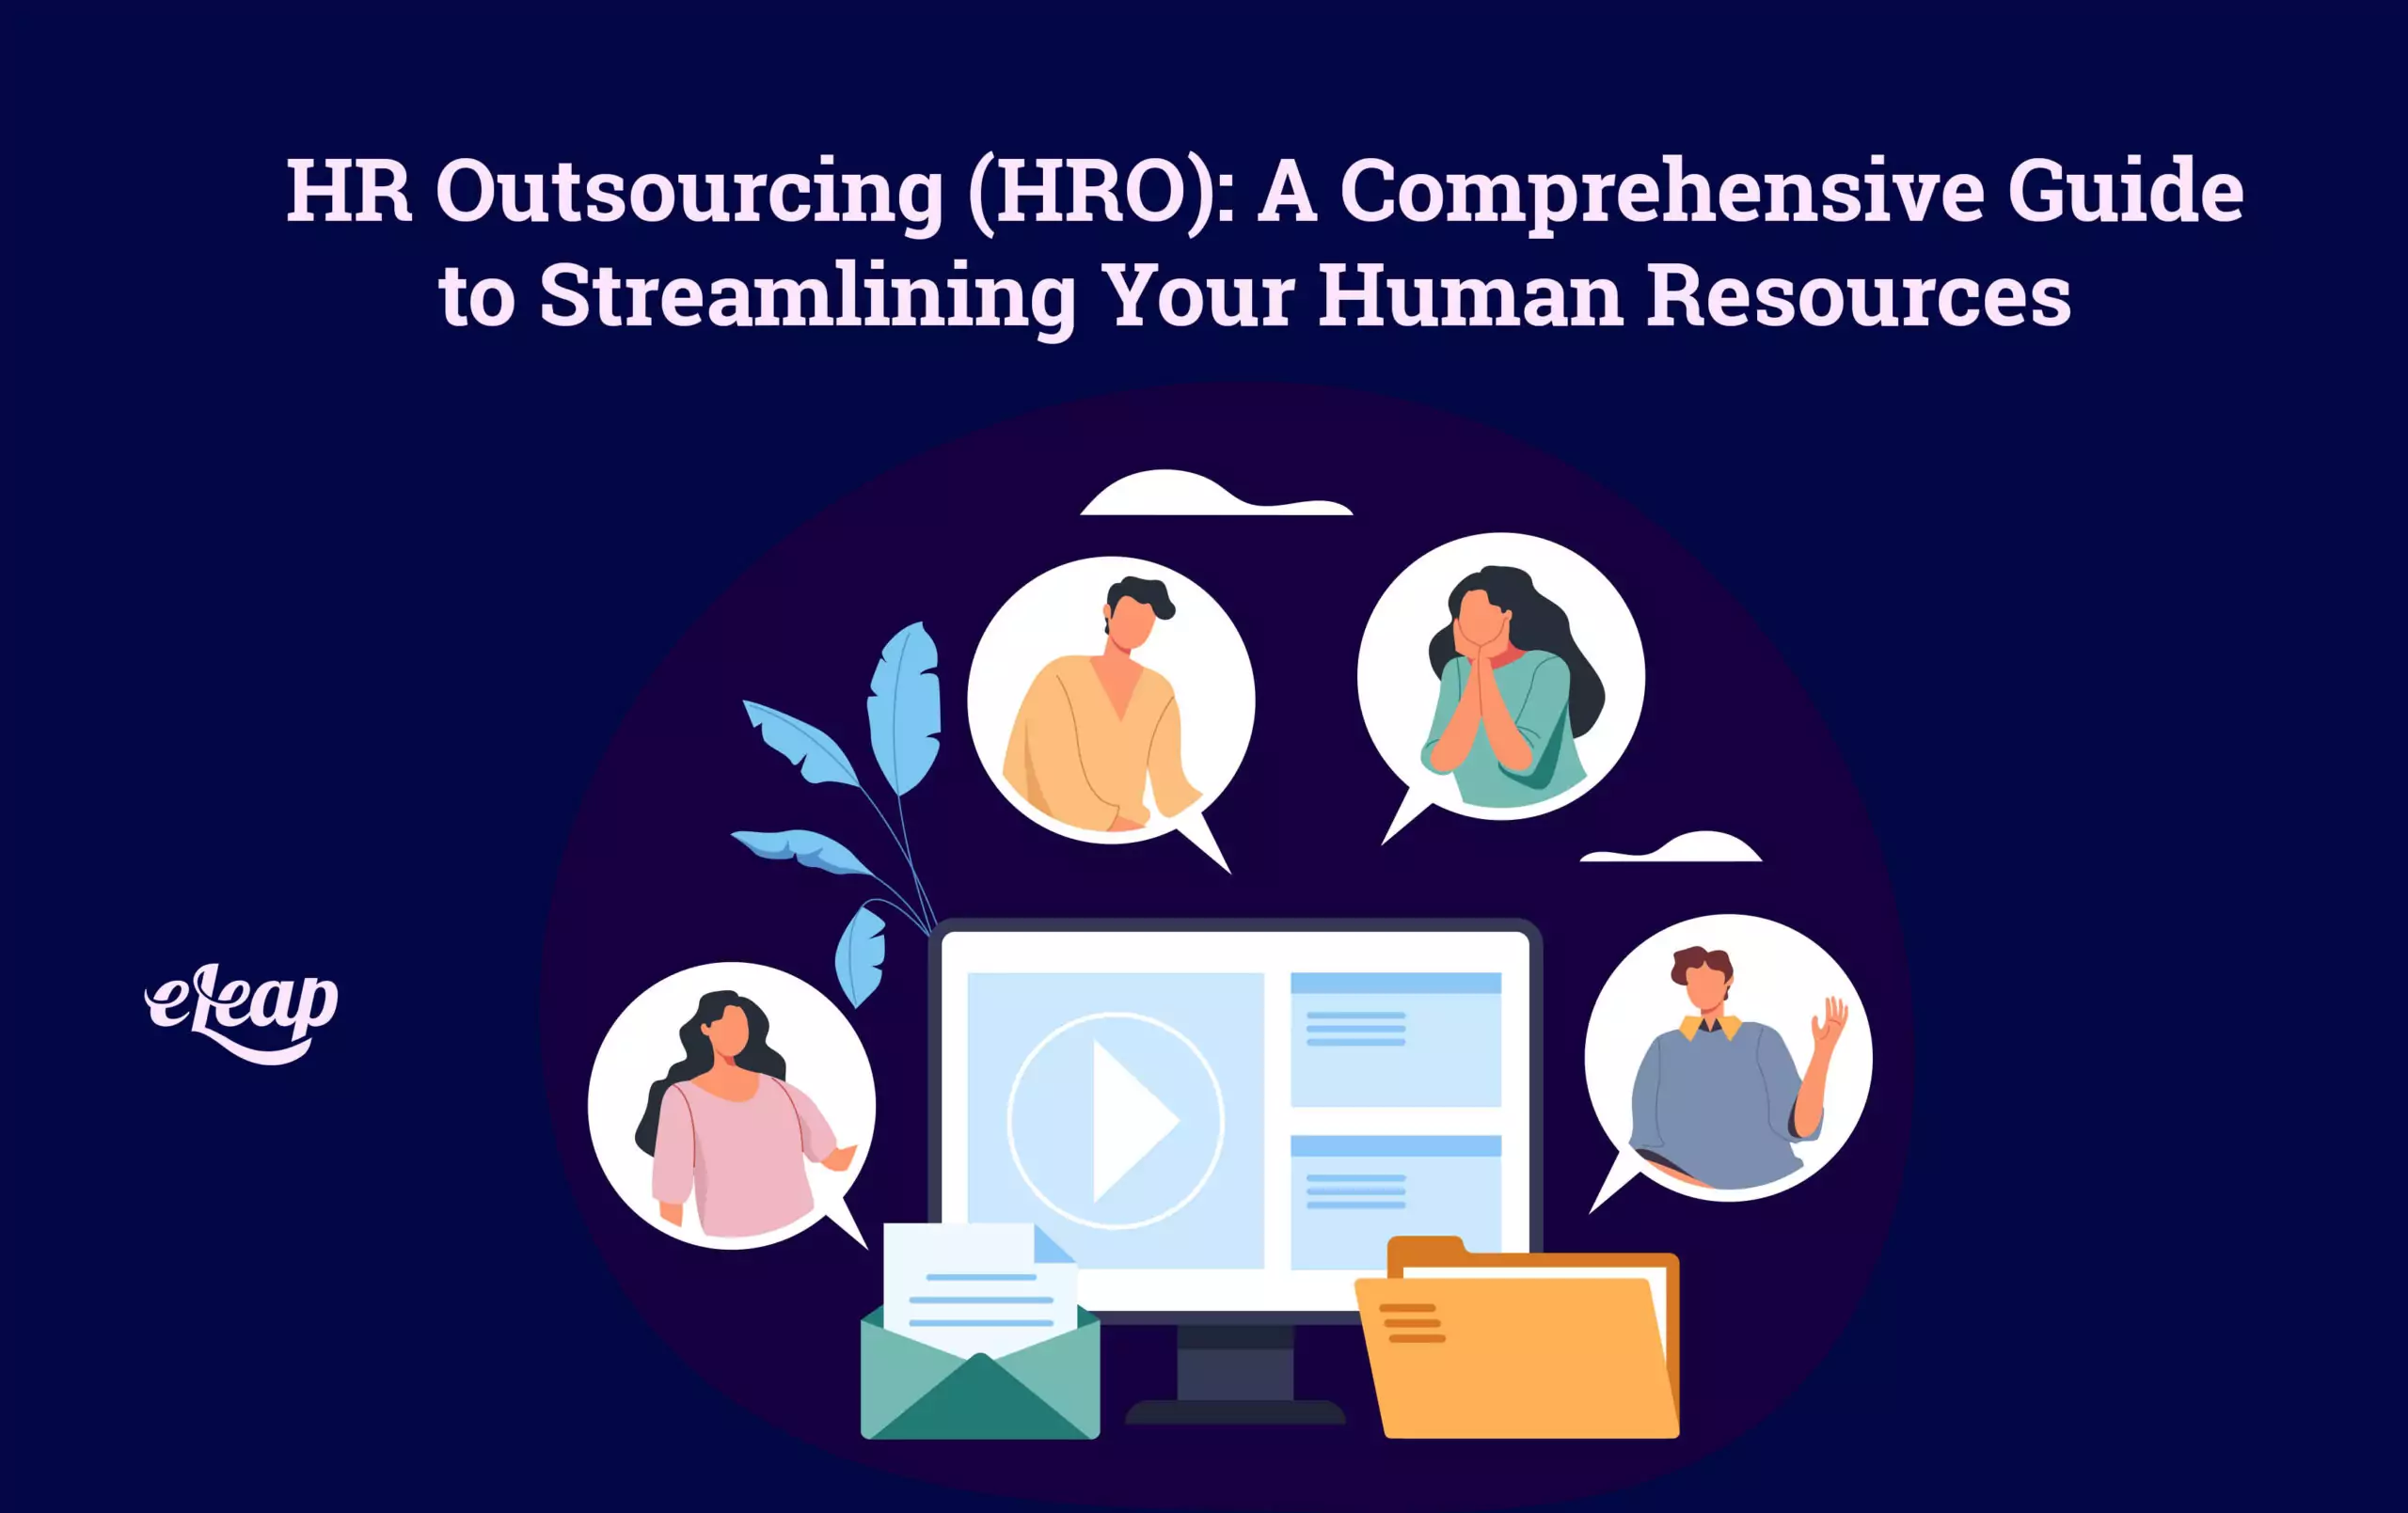 HR Outsourcing (HRO)